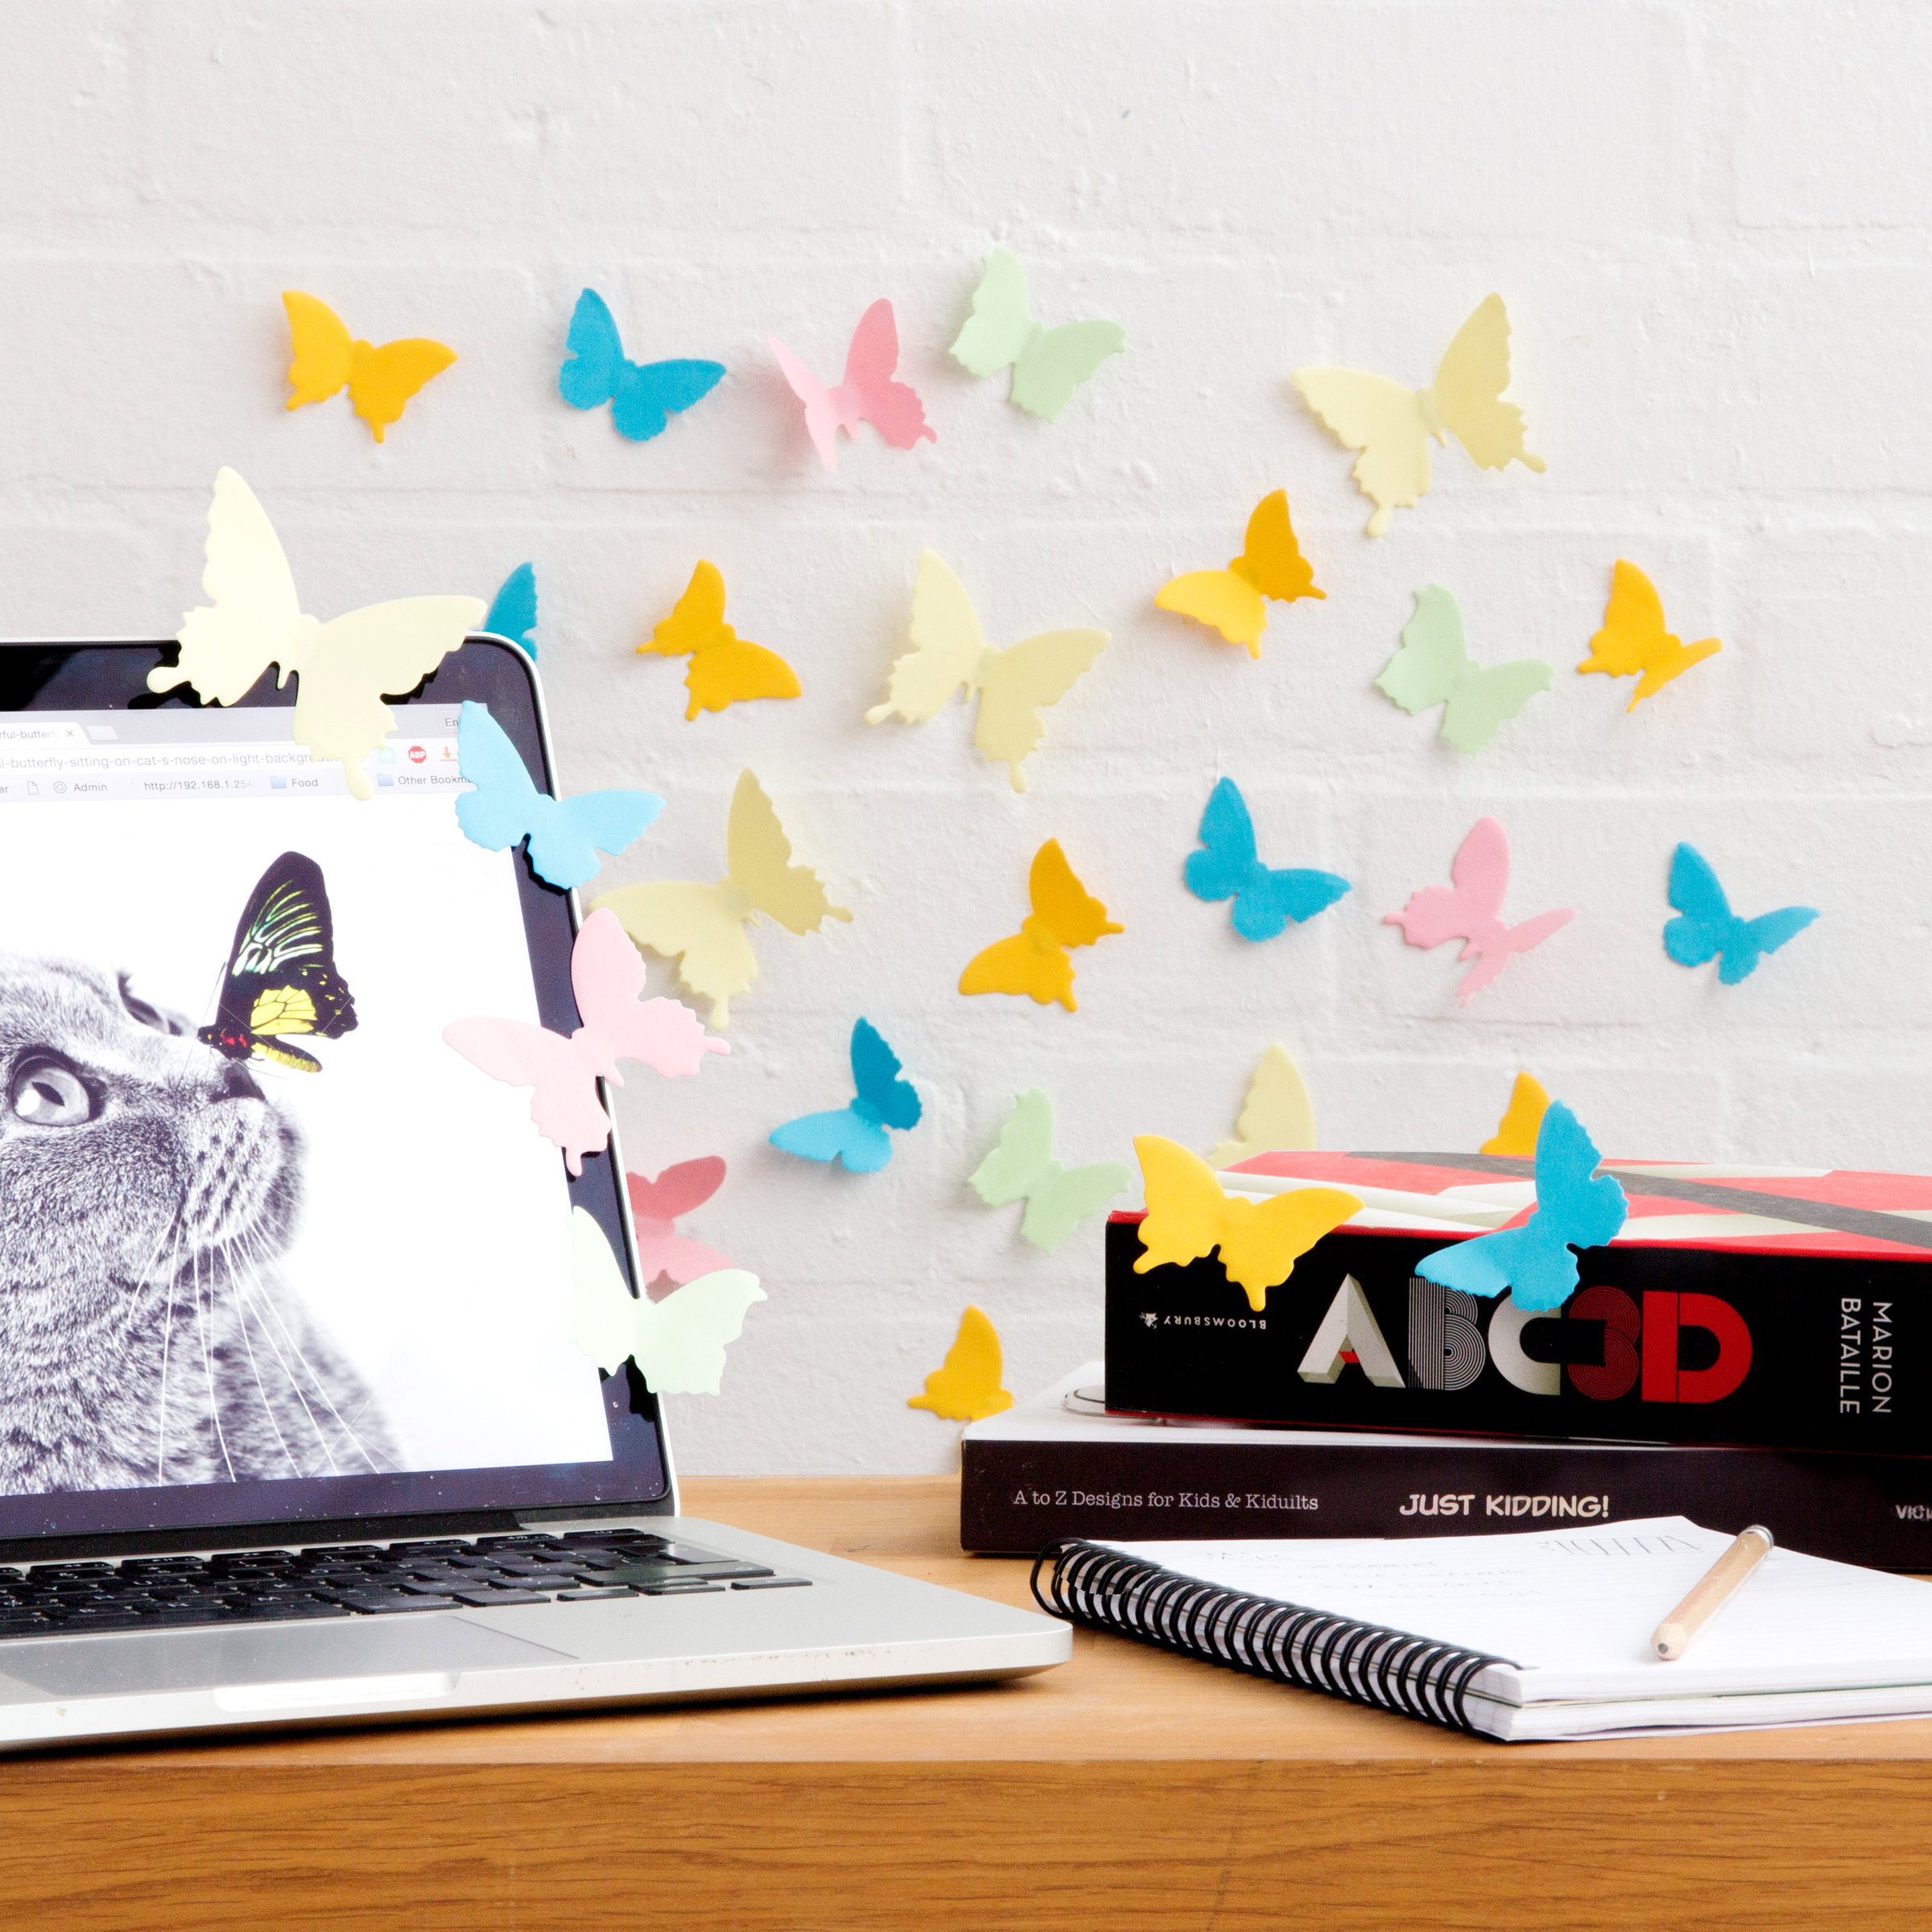 Butterfly speciemen sticky notes on desk and wall